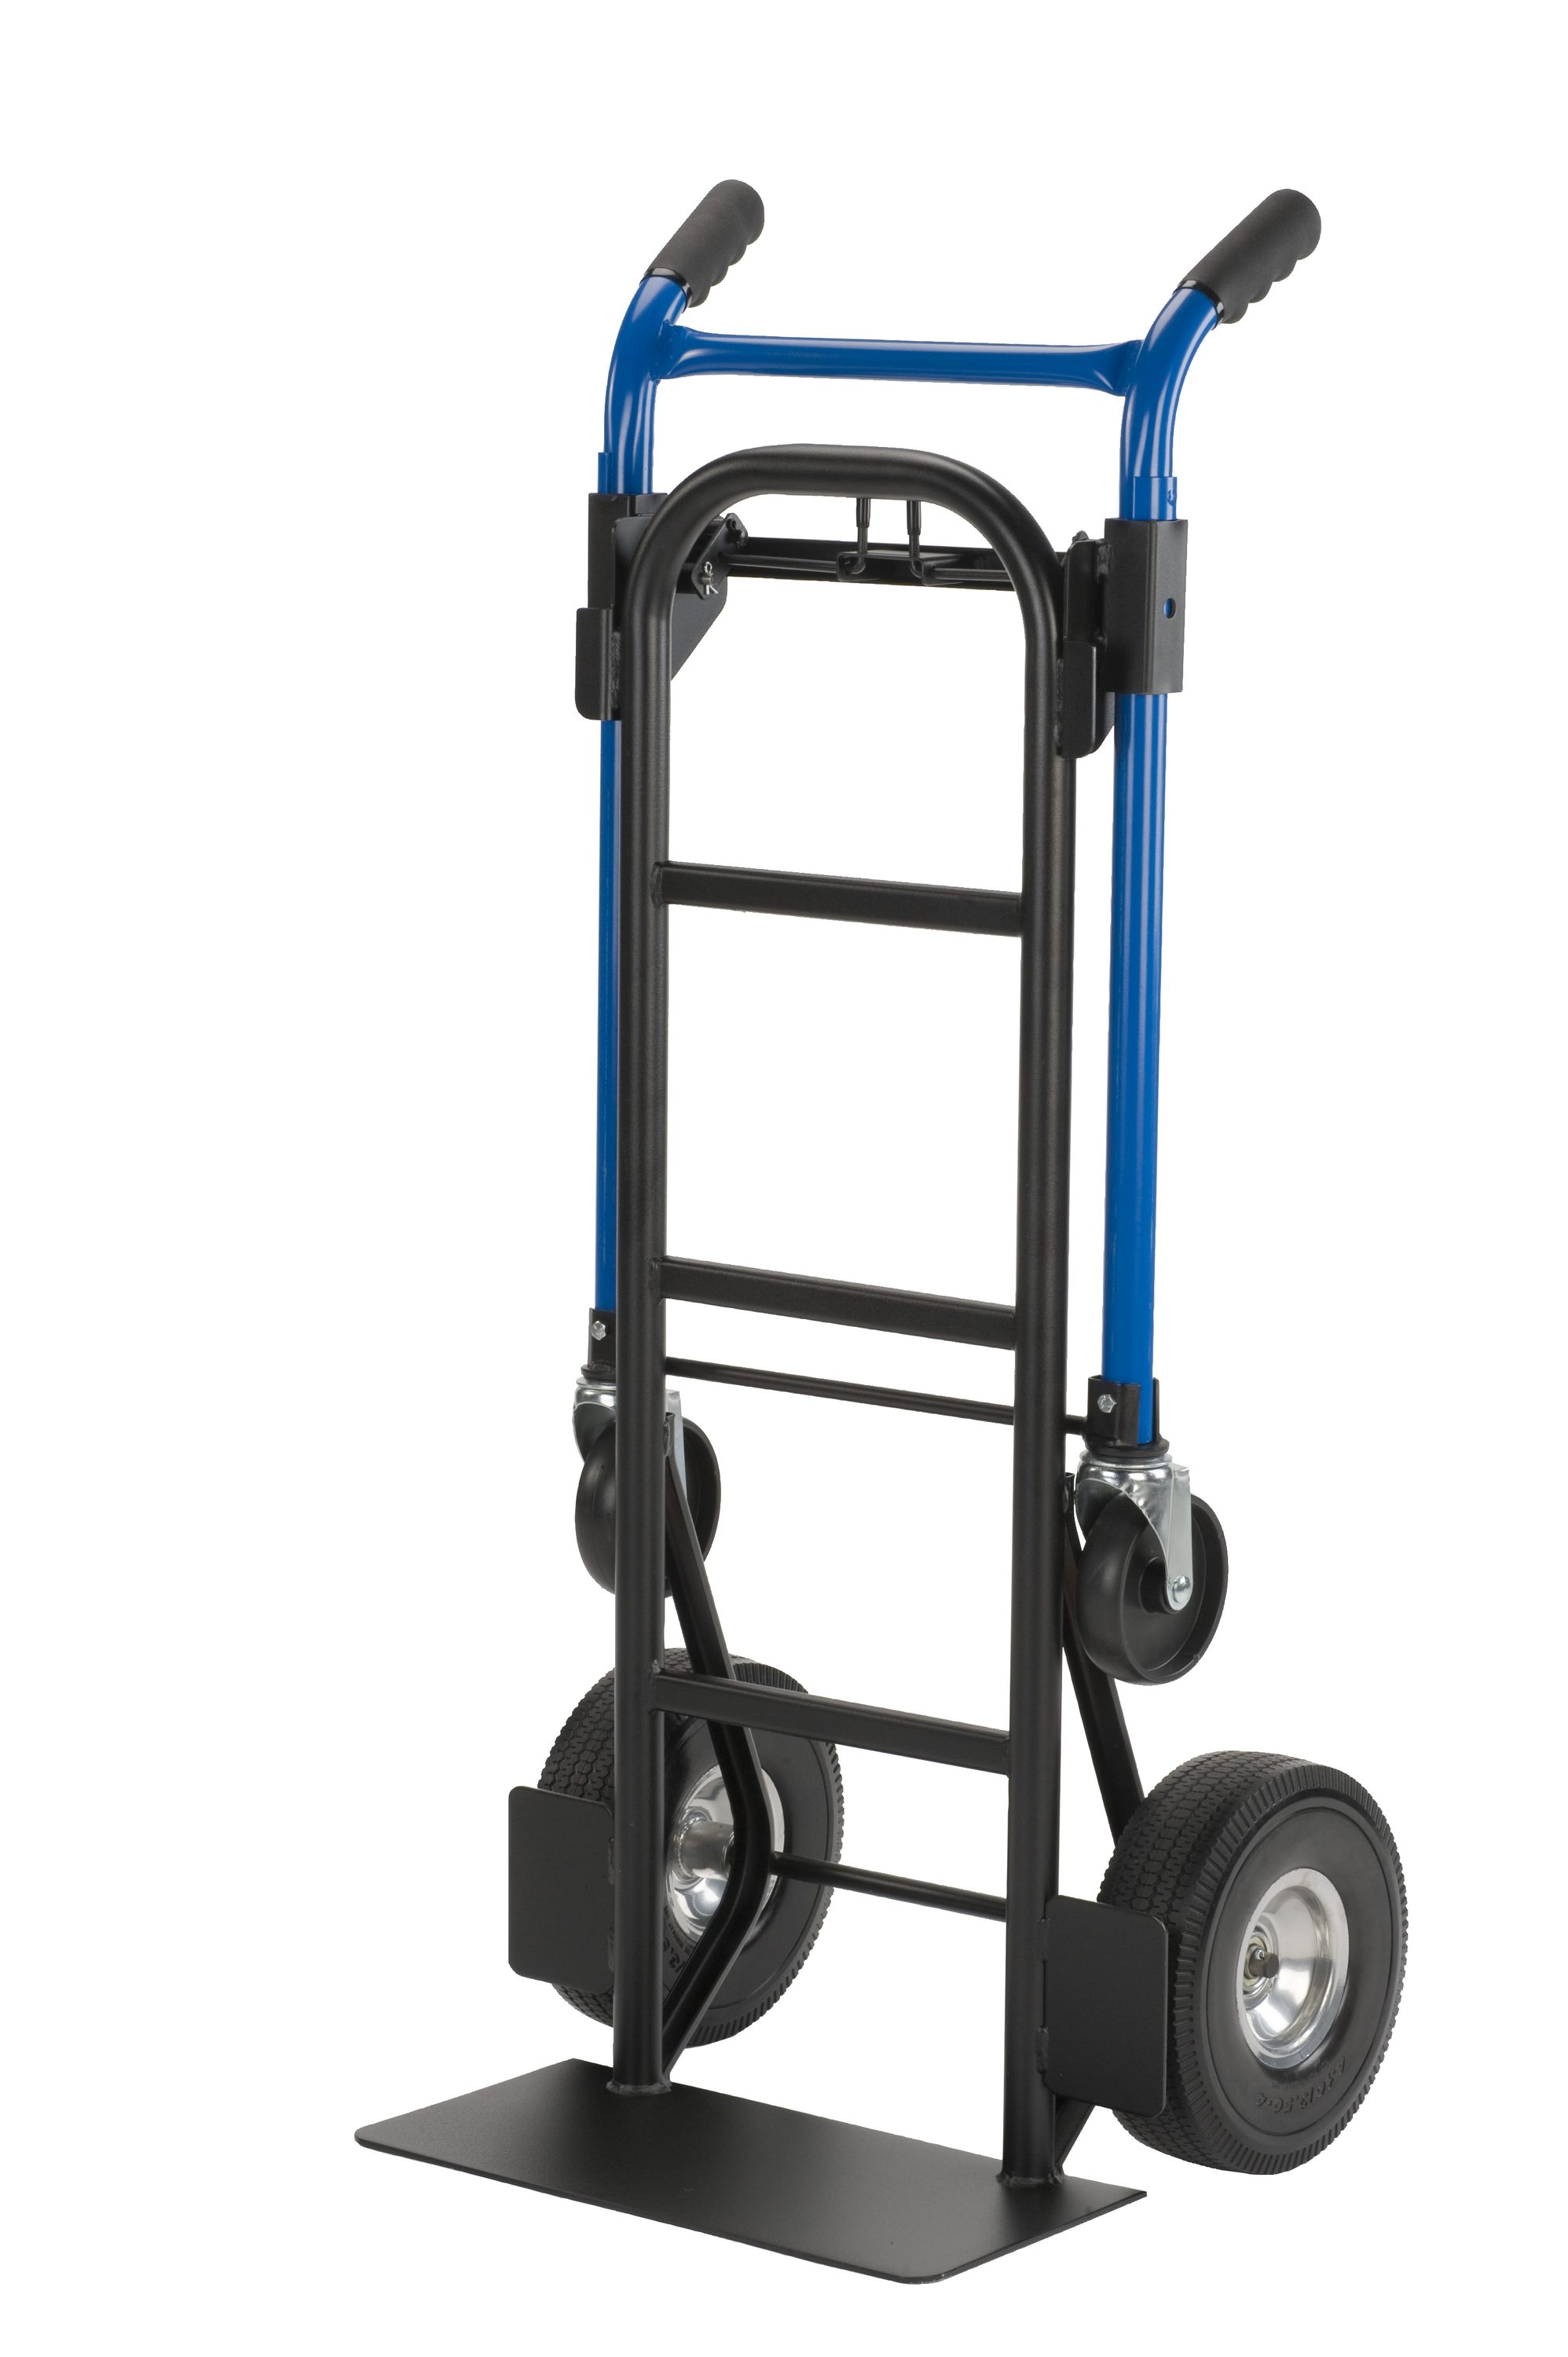 Ronlap Folding Hand Truck, Portable Dolly Cart Foldable Lightweight, 4  Wheels Push Cart Dolly for Moving, 120KG Heavy Duty Moving Dollys with  Wheels, Small Platform Hand Cart with 2 Ropes, Blue